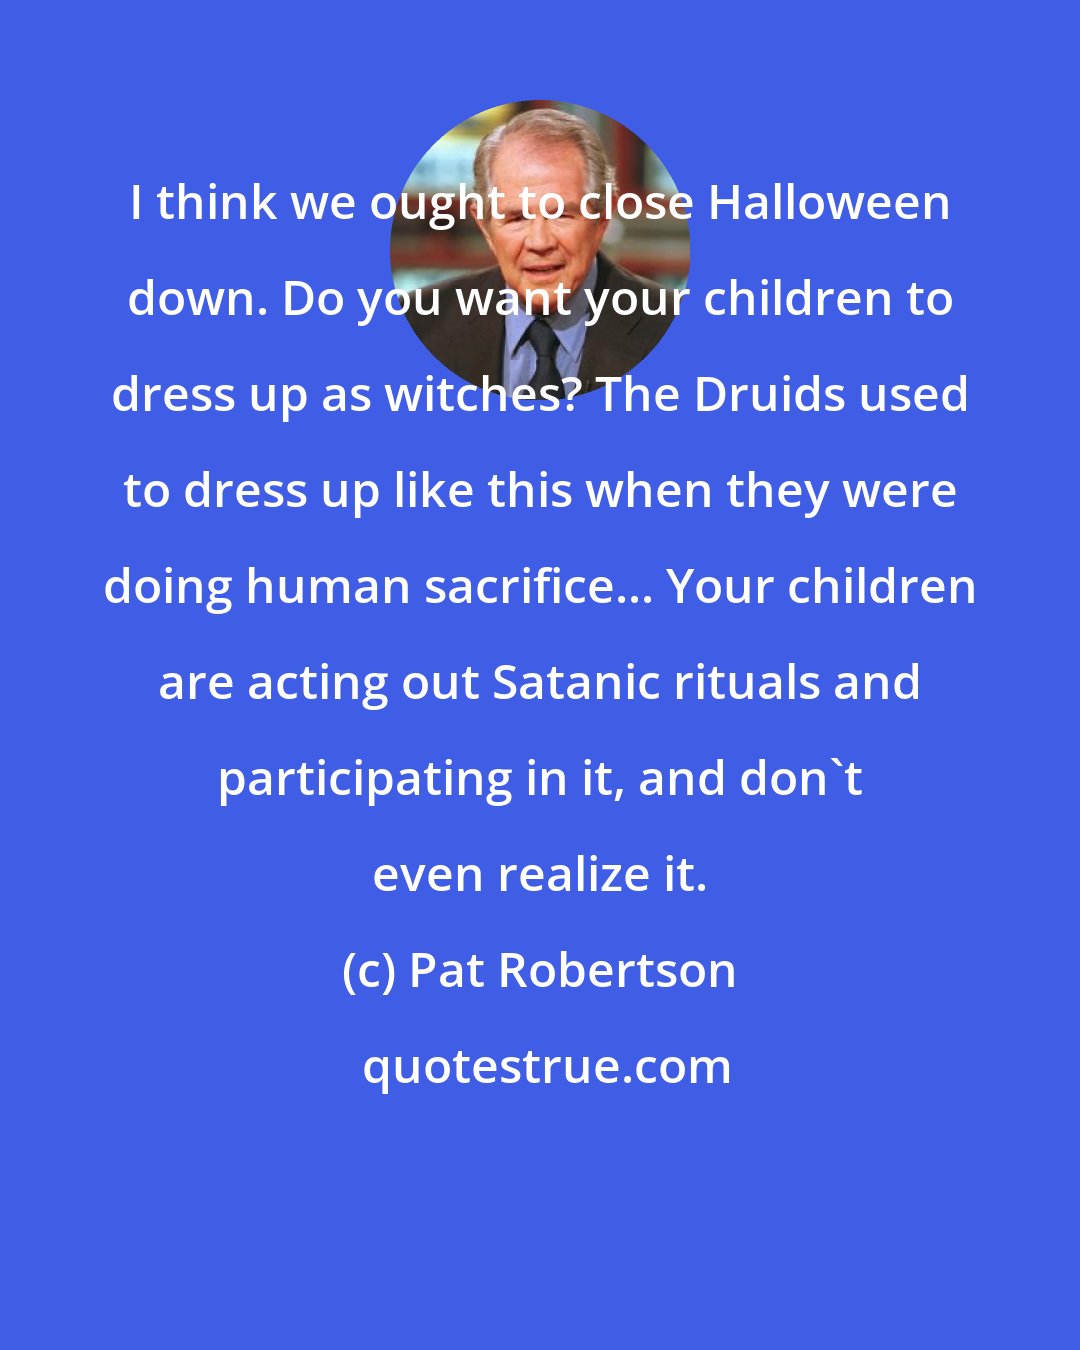 Pat Robertson: I think we ought to close Halloween down. Do you want your children to dress up as witches? The Druids used to dress up like this when they were doing human sacrifice... Your children are acting out Satanic rituals and participating in it, and don't even realize it.